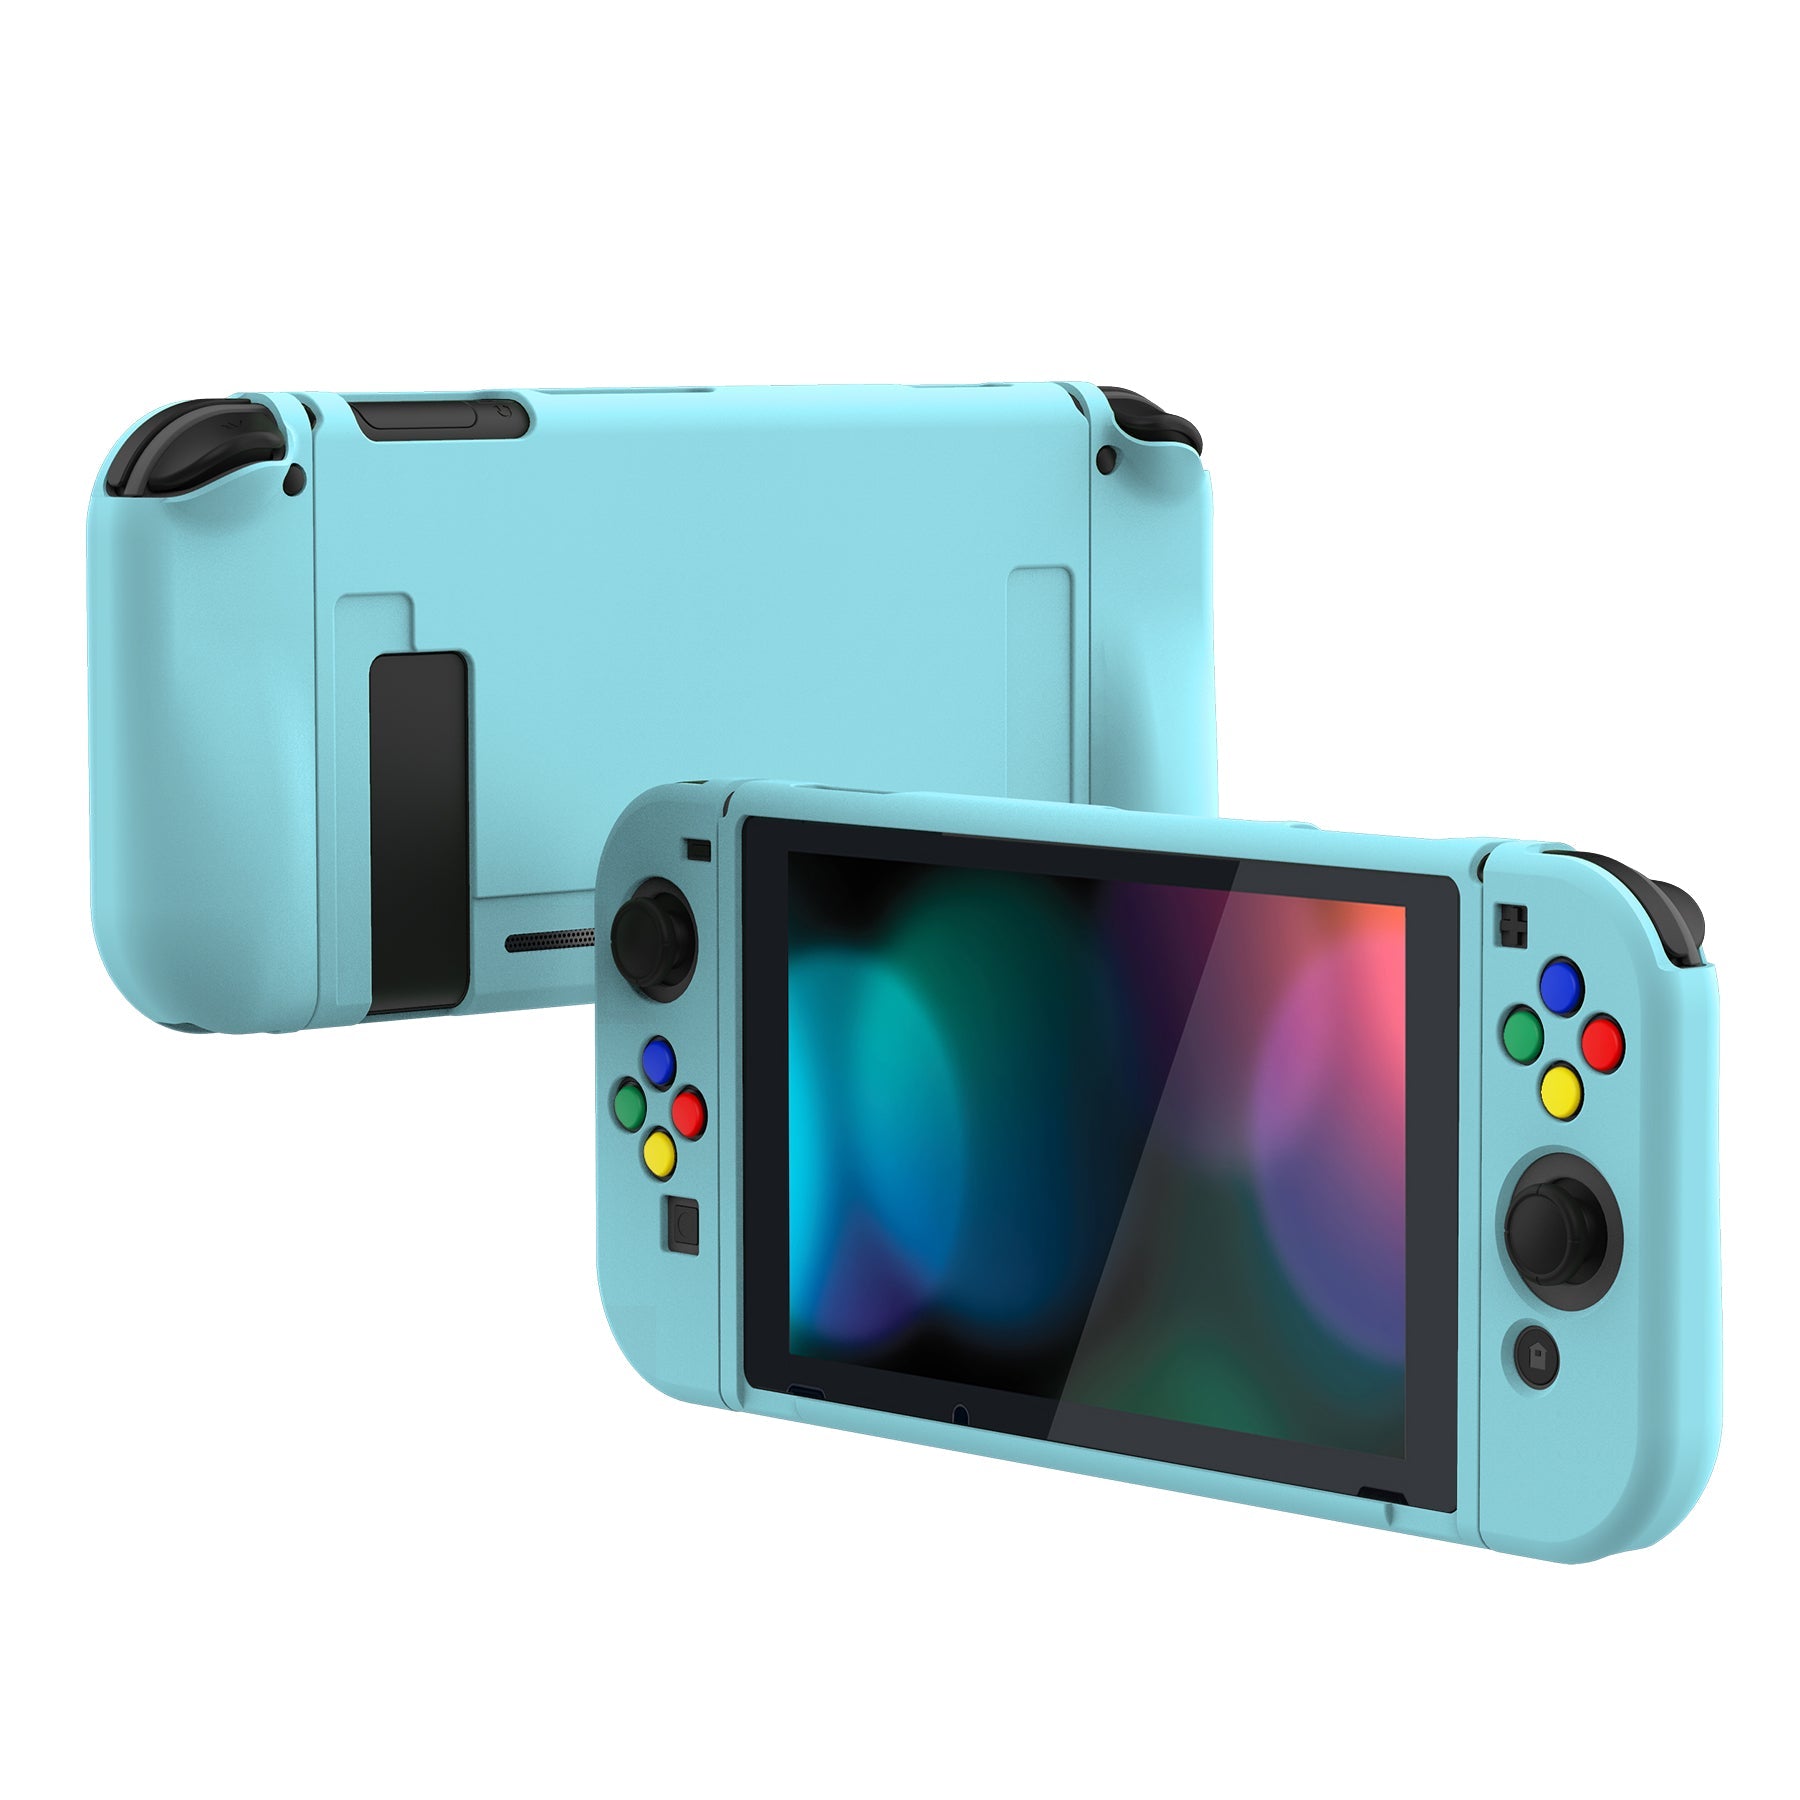 PlayVital Blue Protective Case for NS Switch, Soft TPU Slim Case Cover for NS Switch Joy-Con Console with Colorful ABXY Direction Button Caps - NTU6003 PlayVital